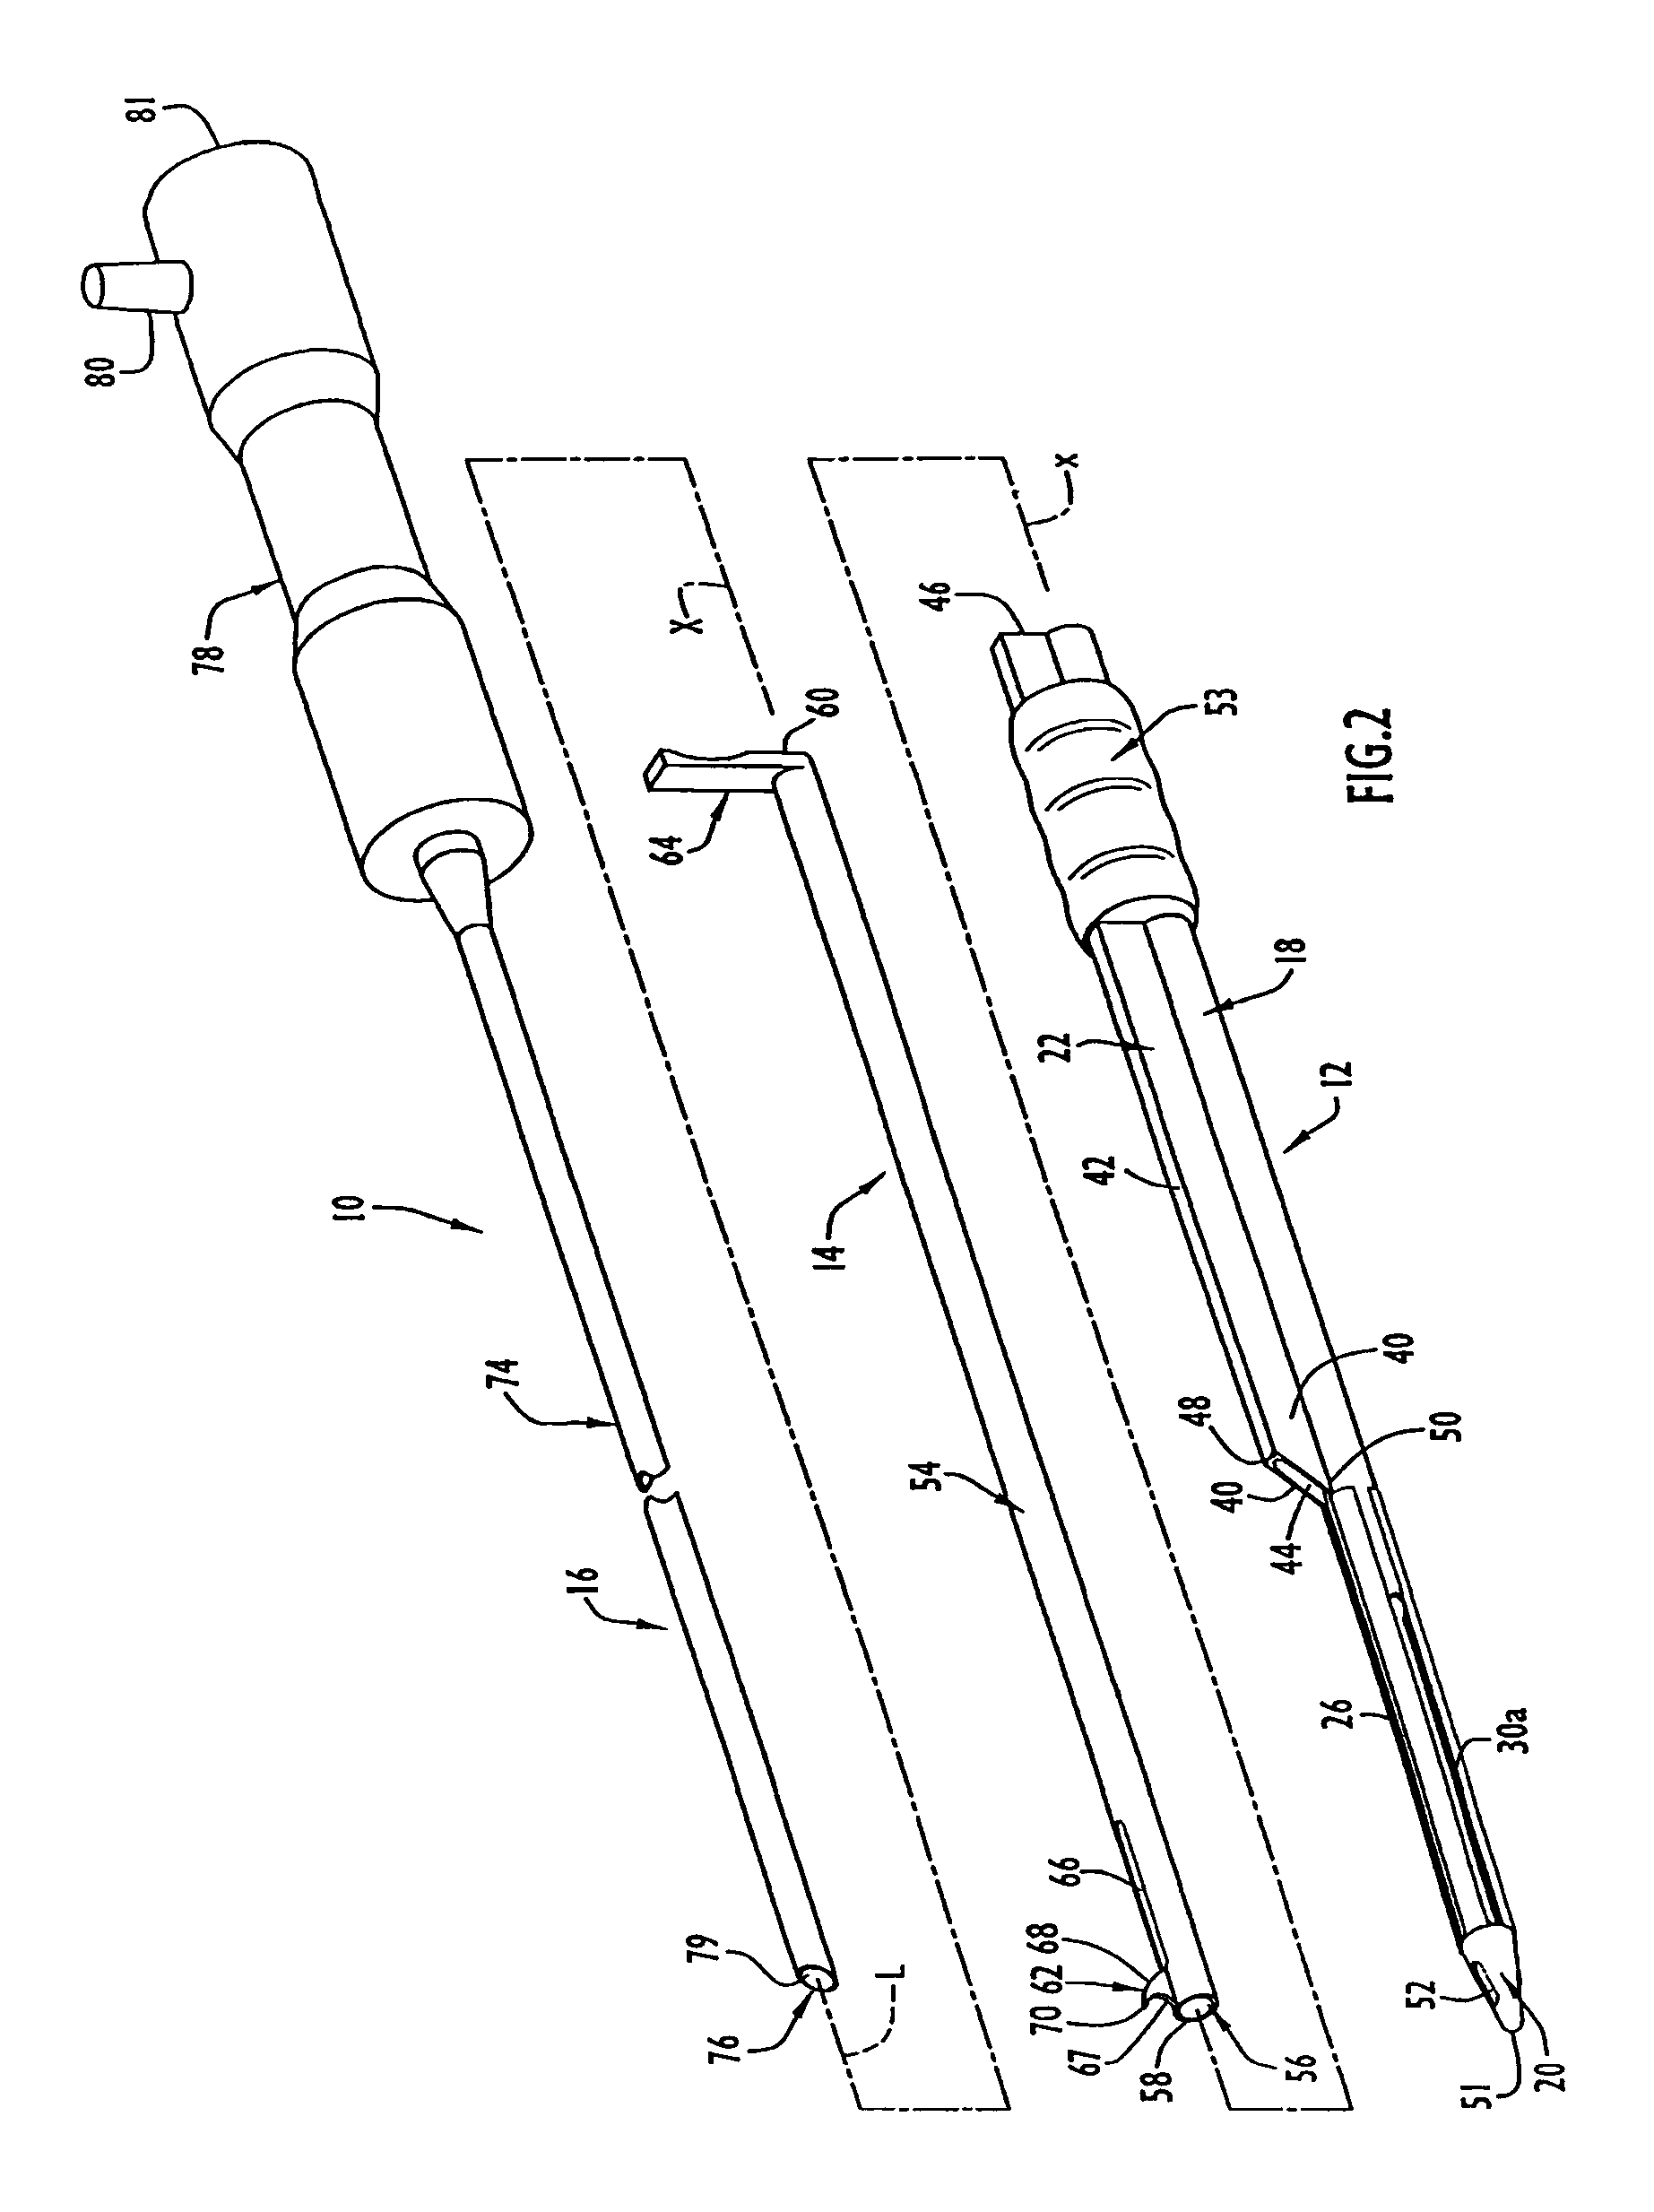 Instruments and methods for minimally invasive carpal tunnel release